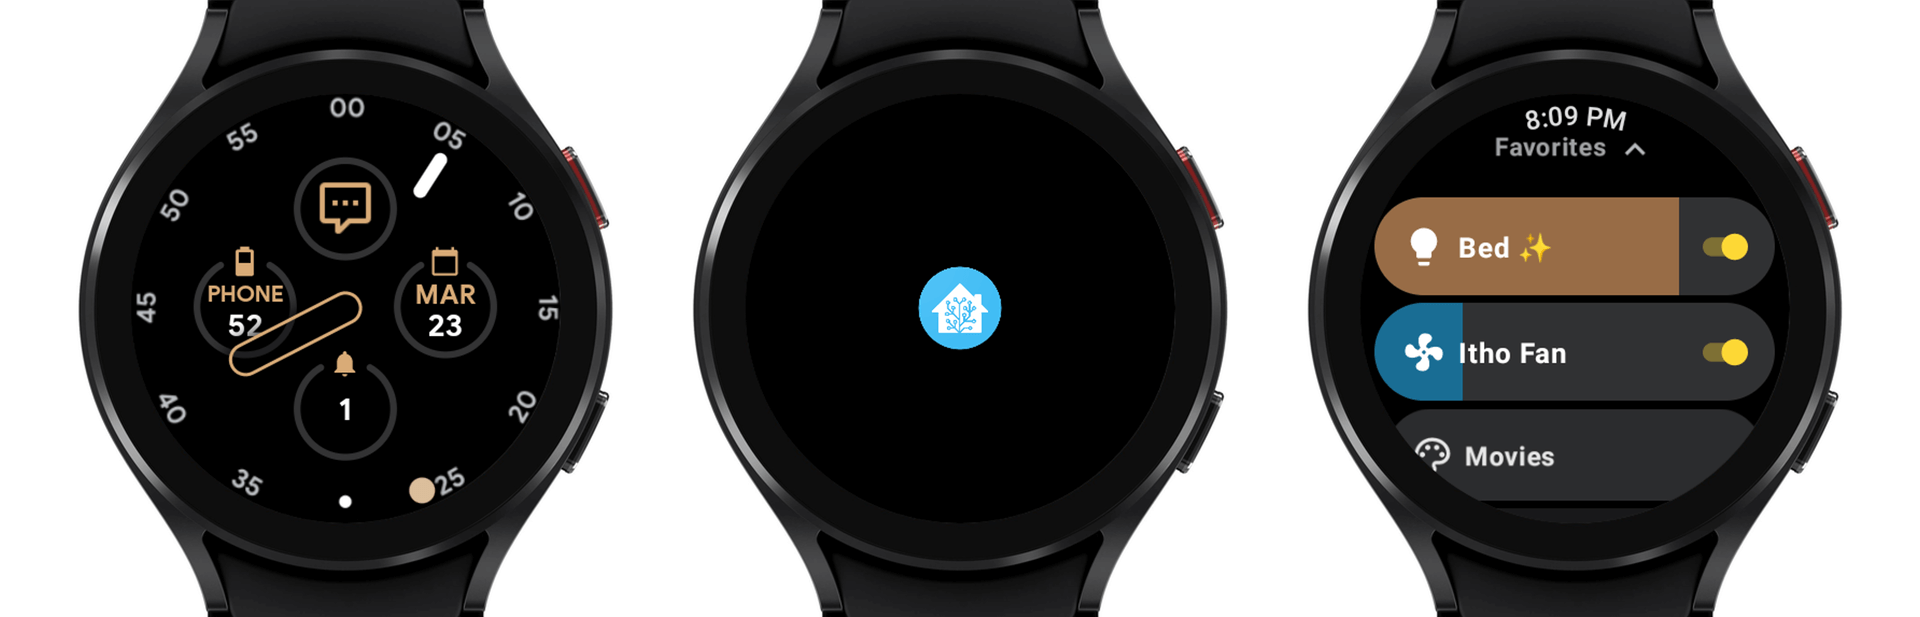 Screenshots of a Wear OS device, showing an Assist complication a watchface, updated launch screen, and favorites only home screen